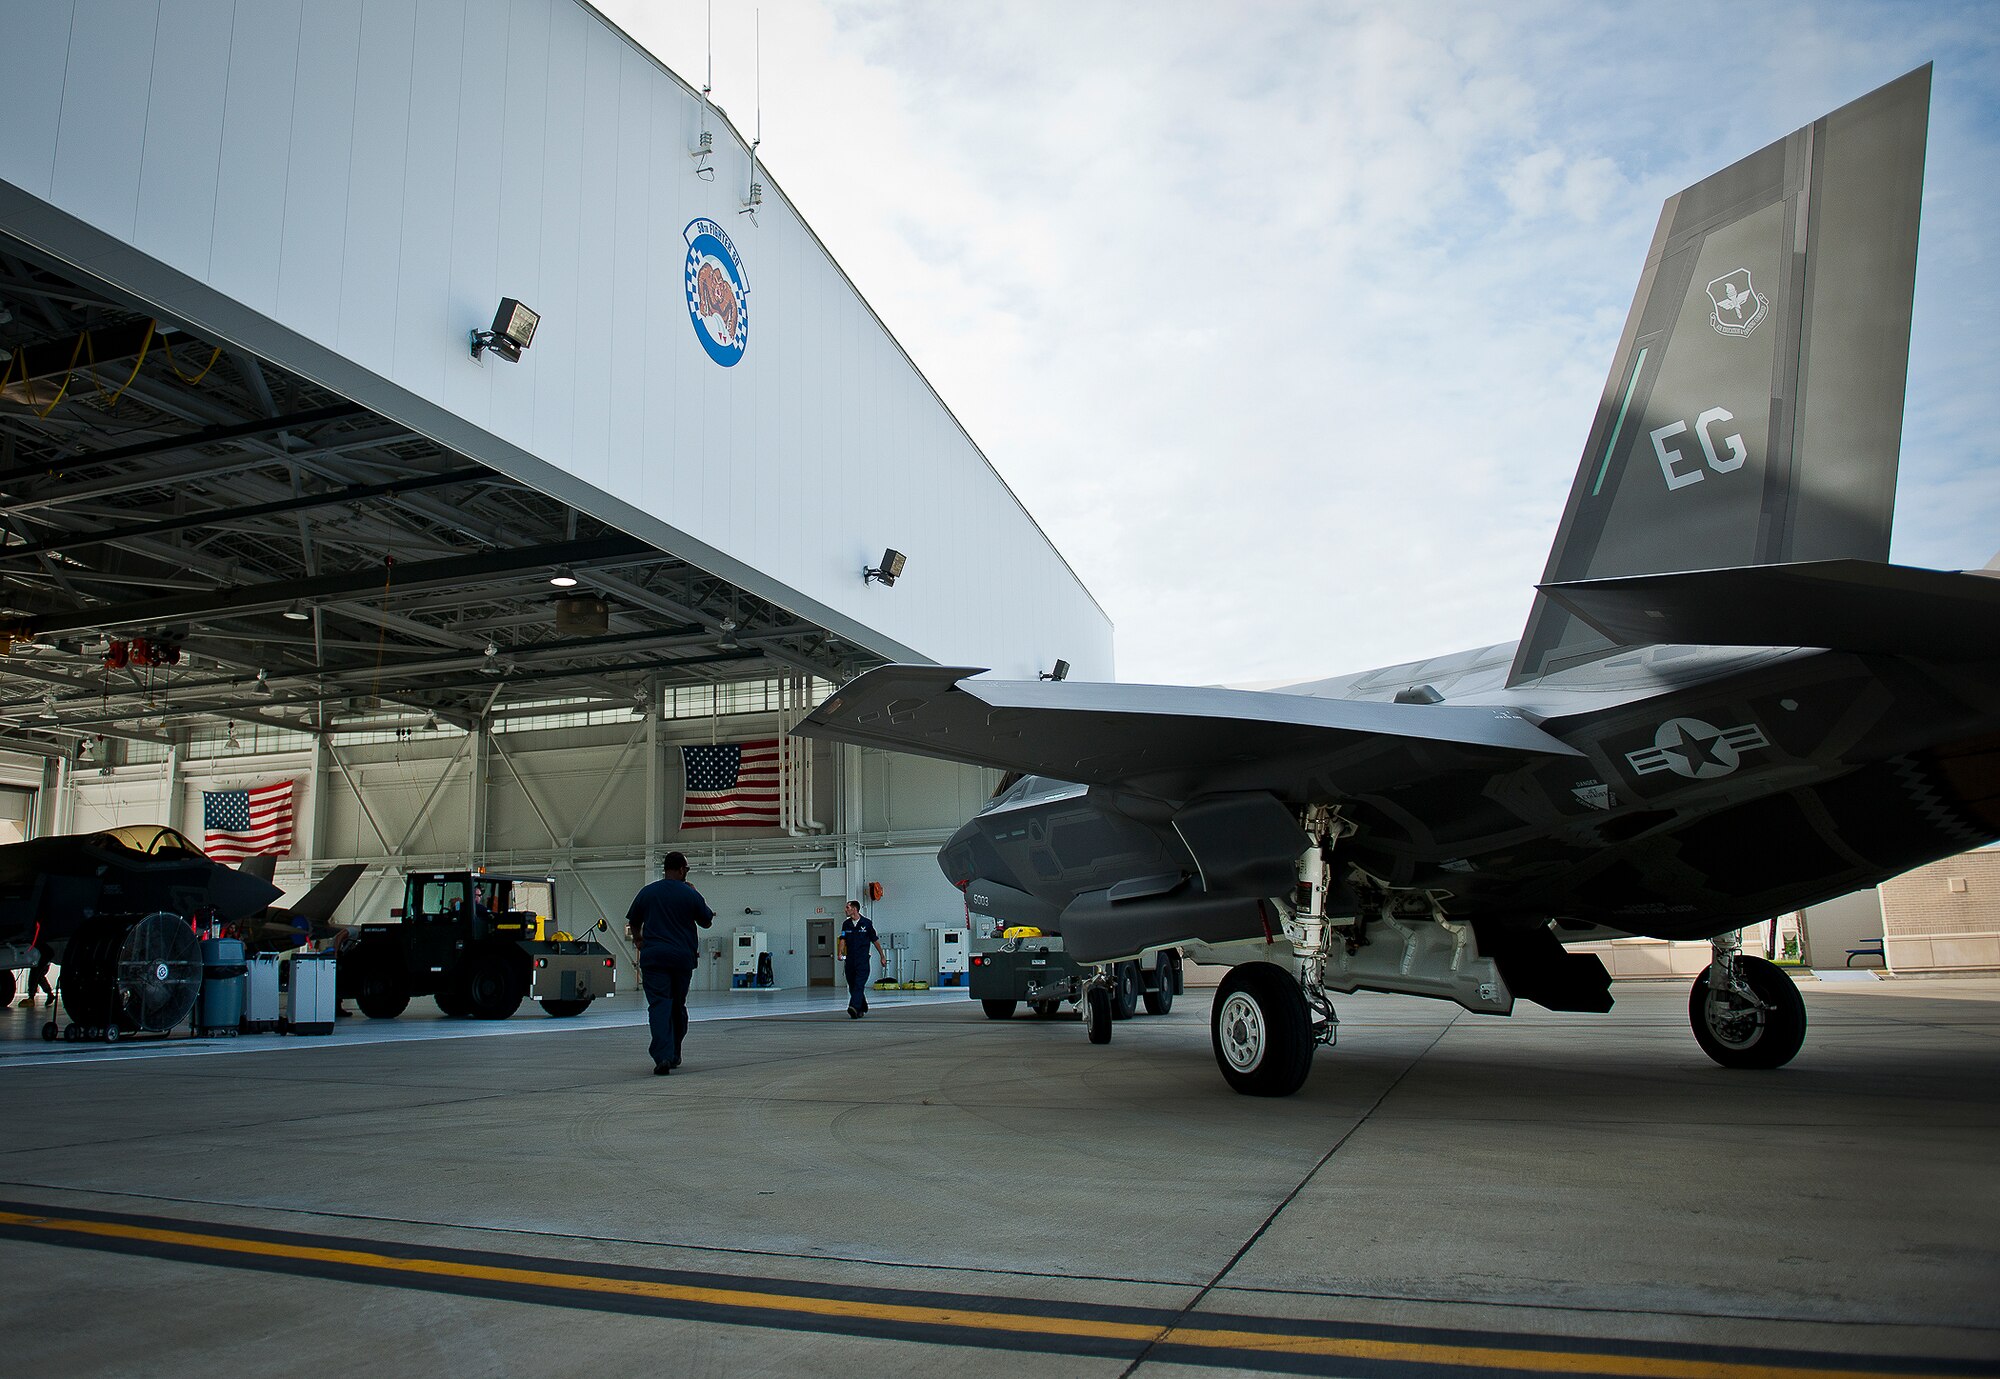 A 33rd Maintenance Squadron Airman backs in an Air Force F-35A Lightning II into the 58th Fighter Squadron hangar at Eglin Air Force Base, Fla., Aug. 27.  The 33rd Fighter Wing’s joint strike fighters were moved into hangars in preparation for the arrival of Hurricane Isaac.  The 58th hangar held nine A models, while the Marine Fighter Attack Squadron 501 hangar stored the 10 B models.  (U.S. Air Force photo/Samuel King Jr.)  